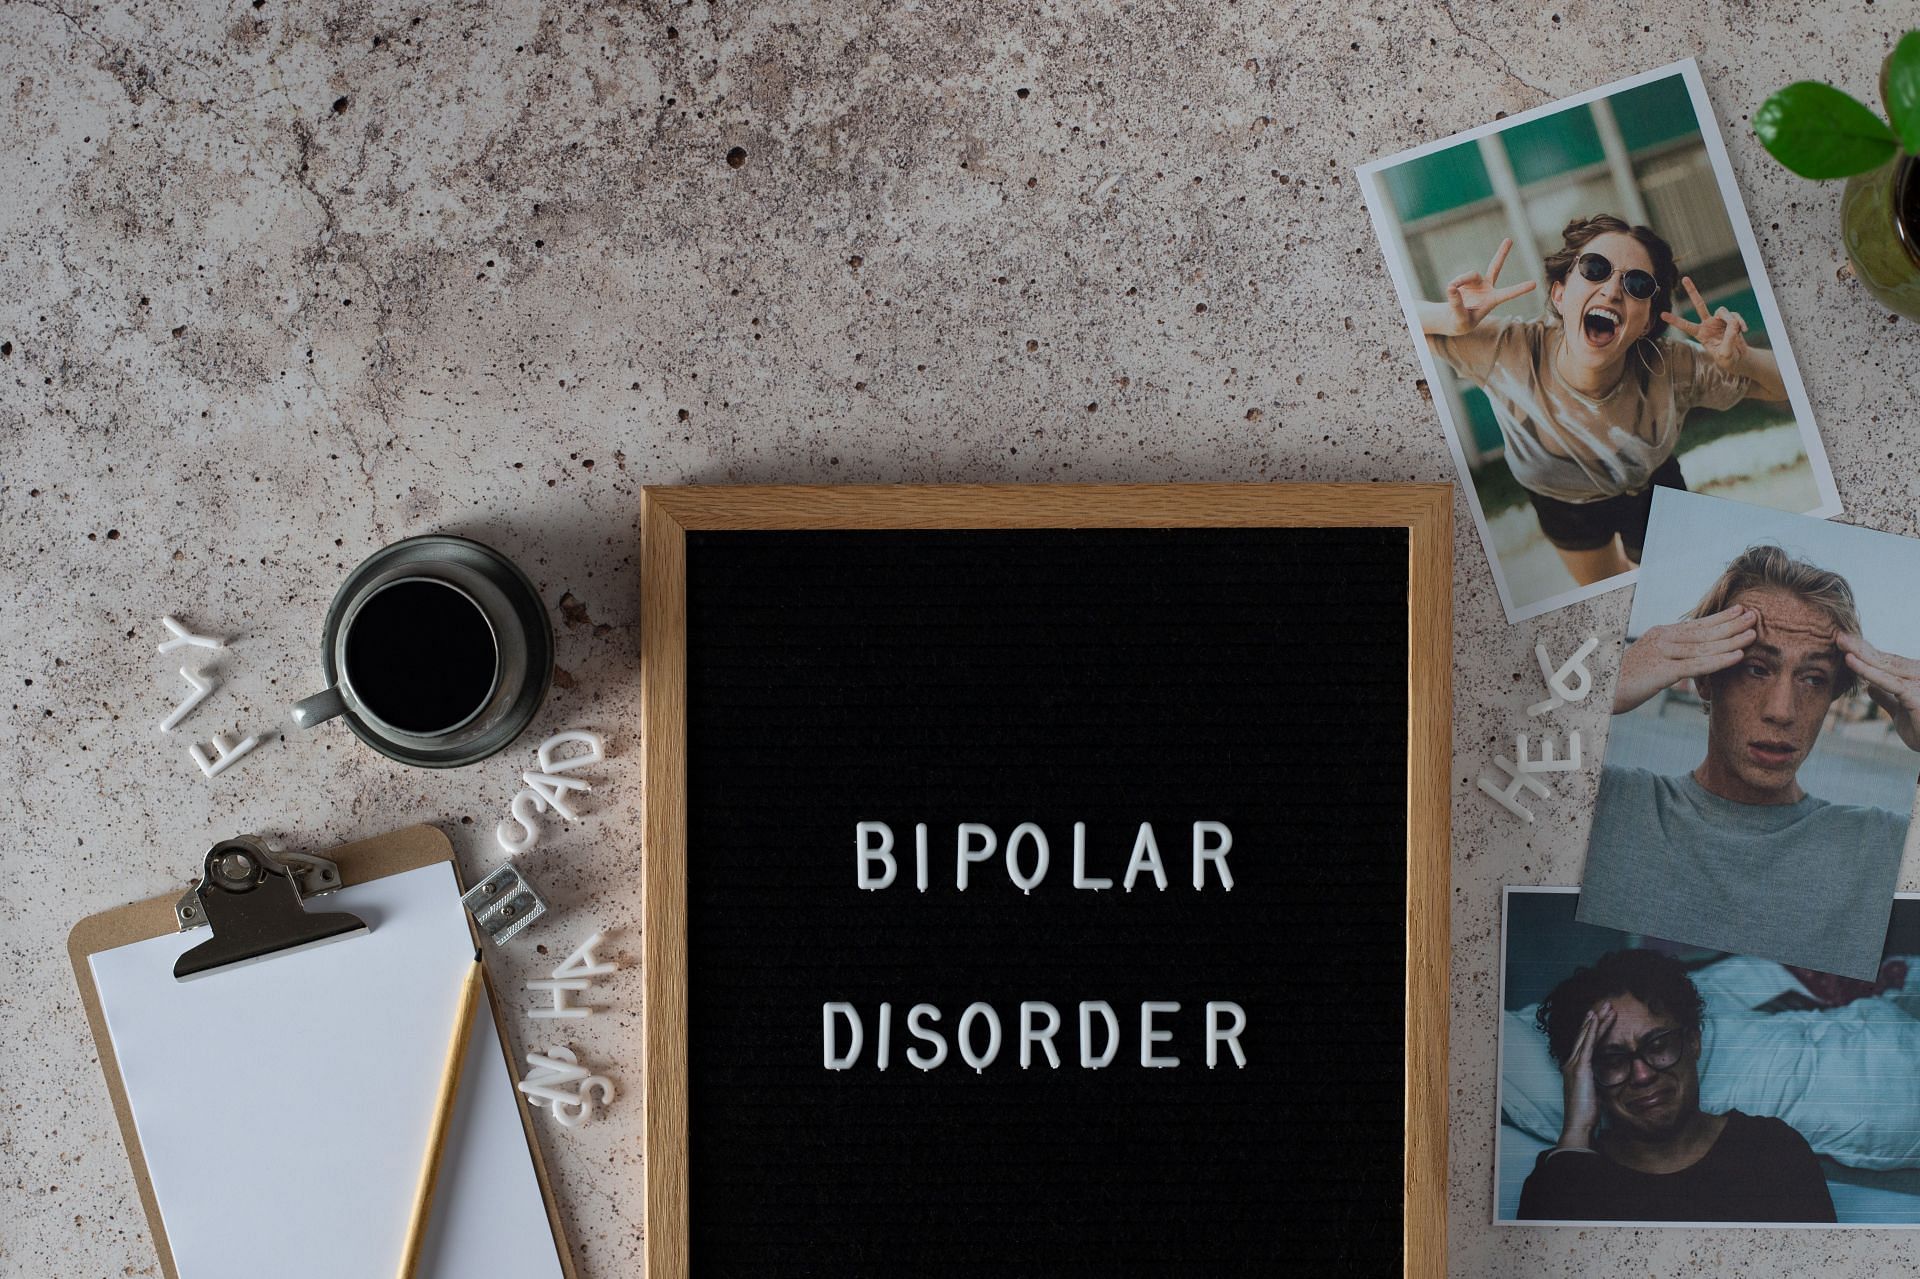 A disorder ranging from depressive lows to manic highs. ( Photo by micheile dot com via unsplash )